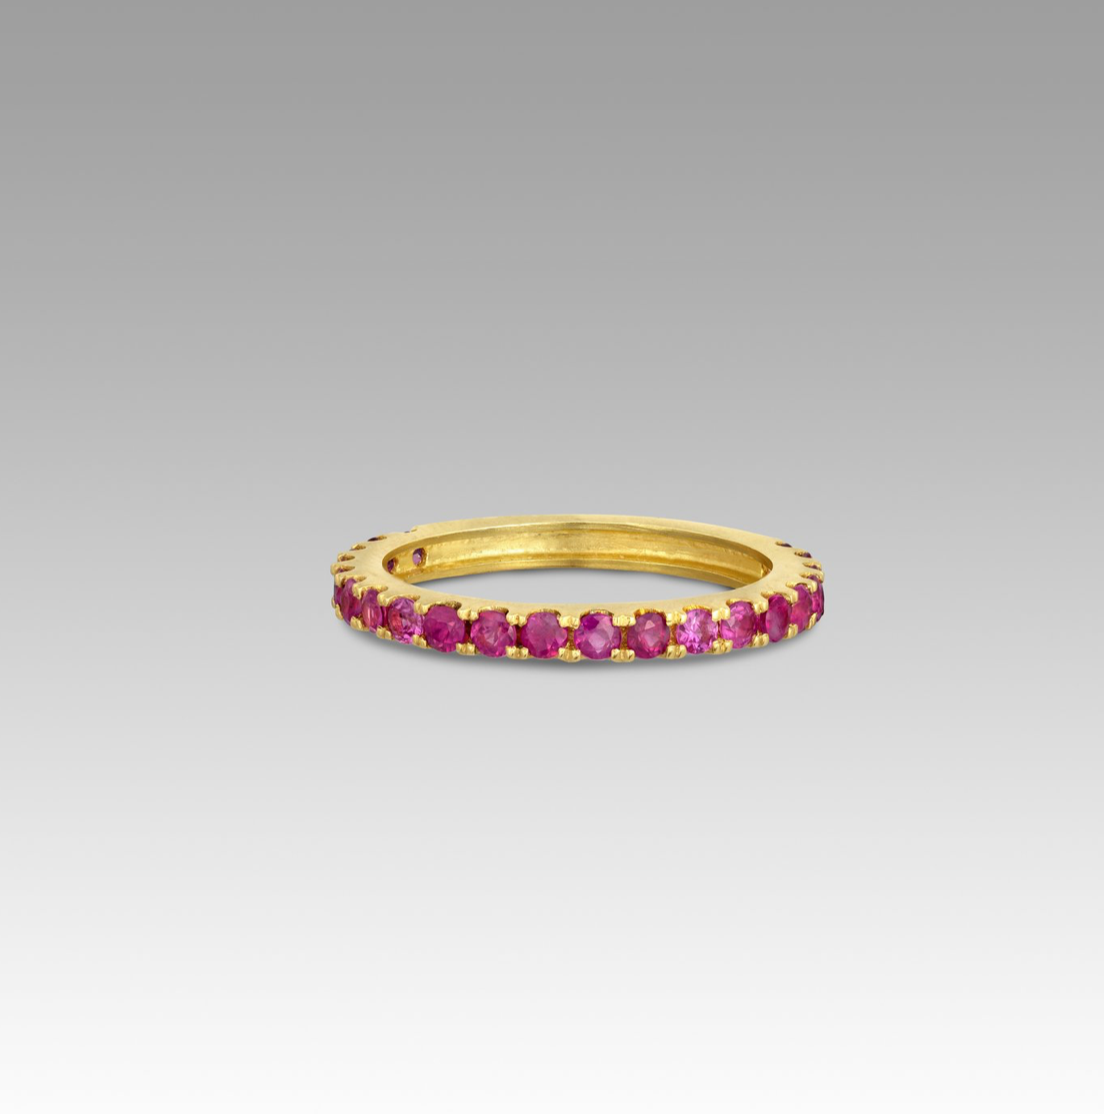 Hetre Alresford Hampshire Jewellery Sophie Theakston Ruby Eternity Ring